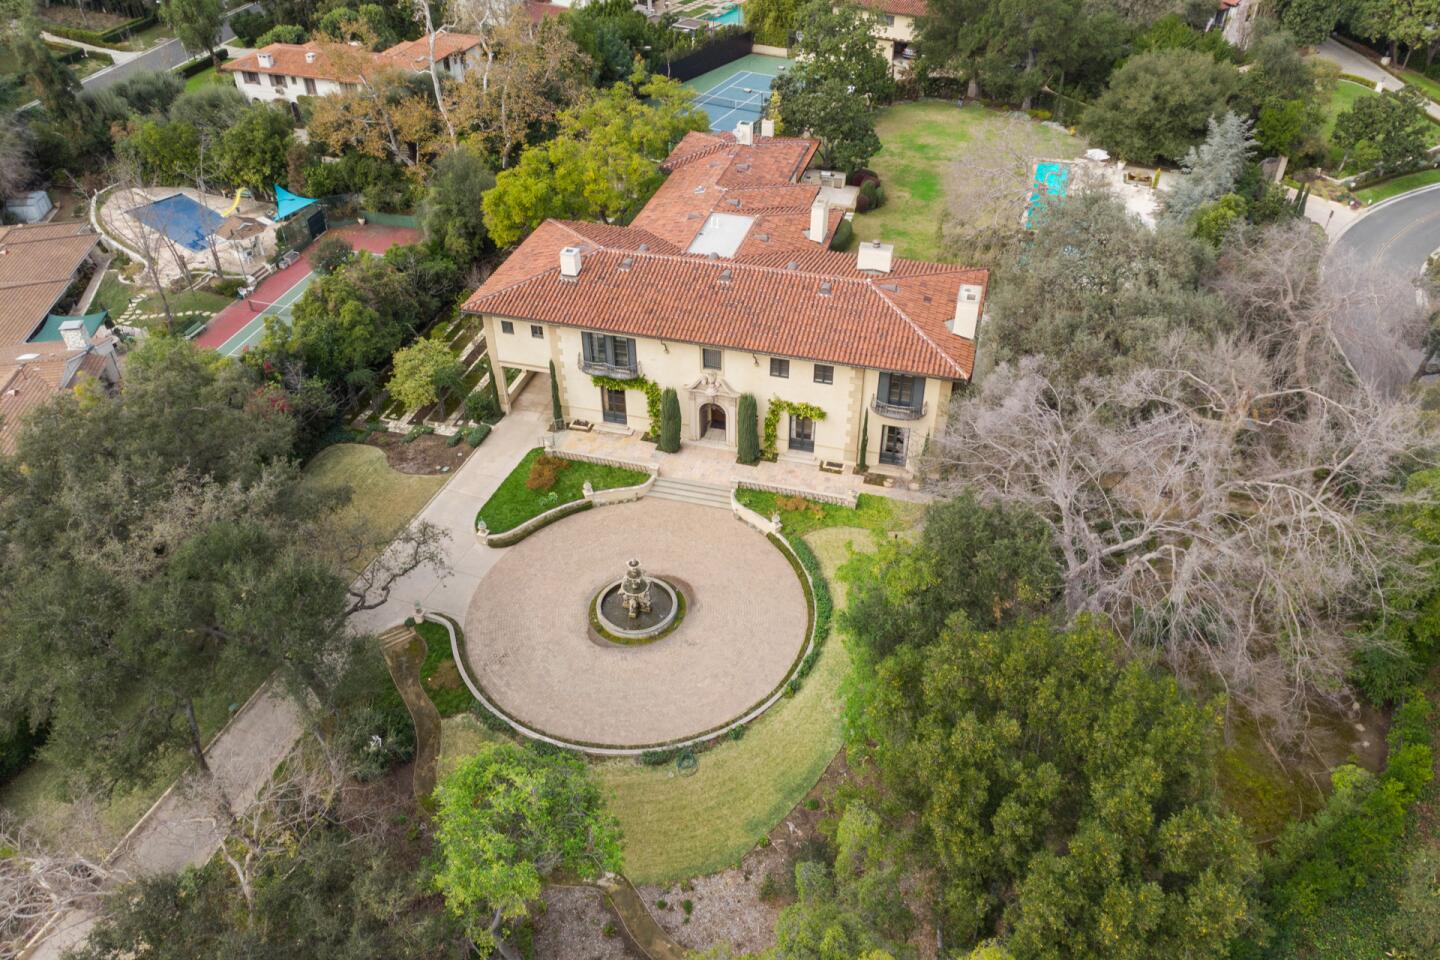 Aerial view of the mansion, its circular motor court and surrounding trees.